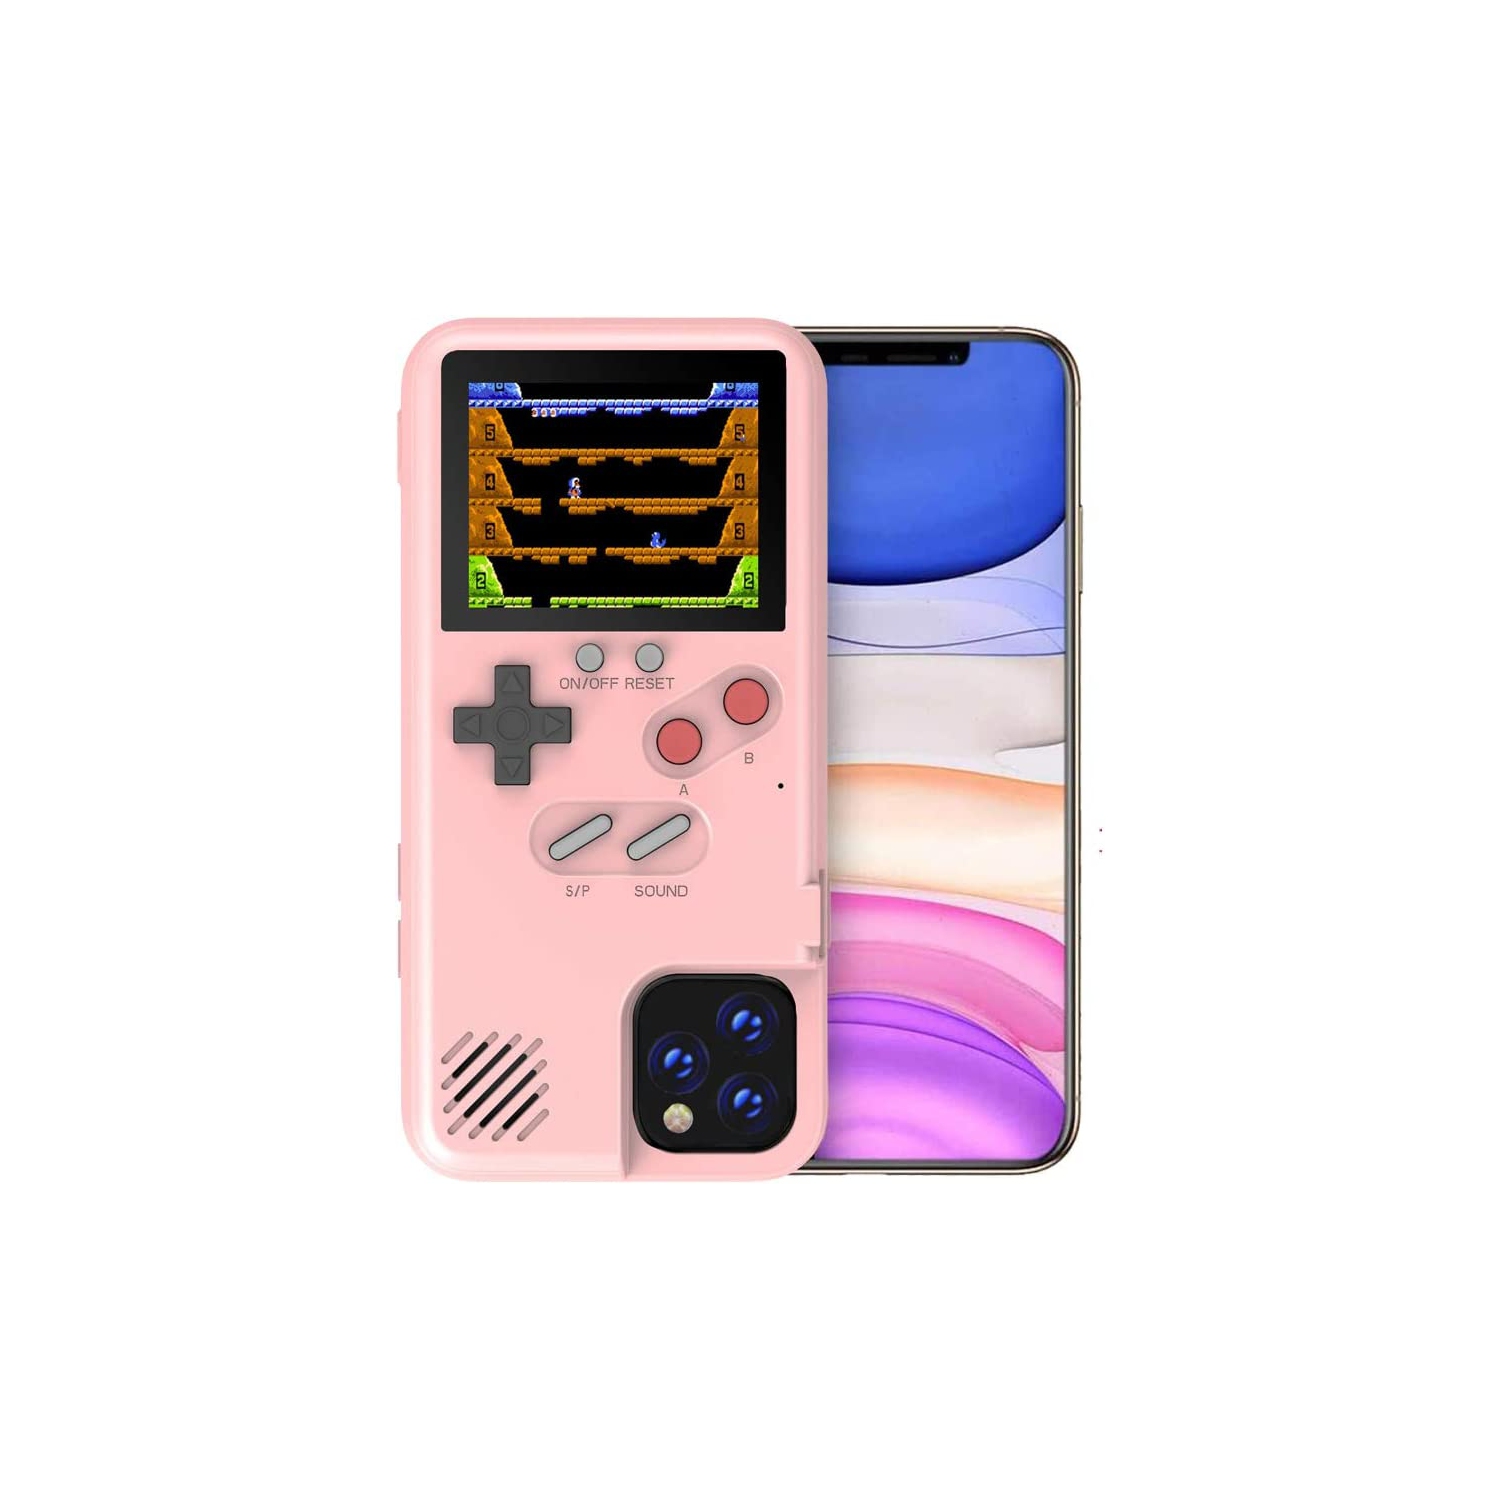 Game Console Case for iPhone 8, Shockproof Case with Video Games for iPhone 7, Color Display Retro Gameboy Case, Game Phone Case for iPhone 6/6S/7/8, Pink